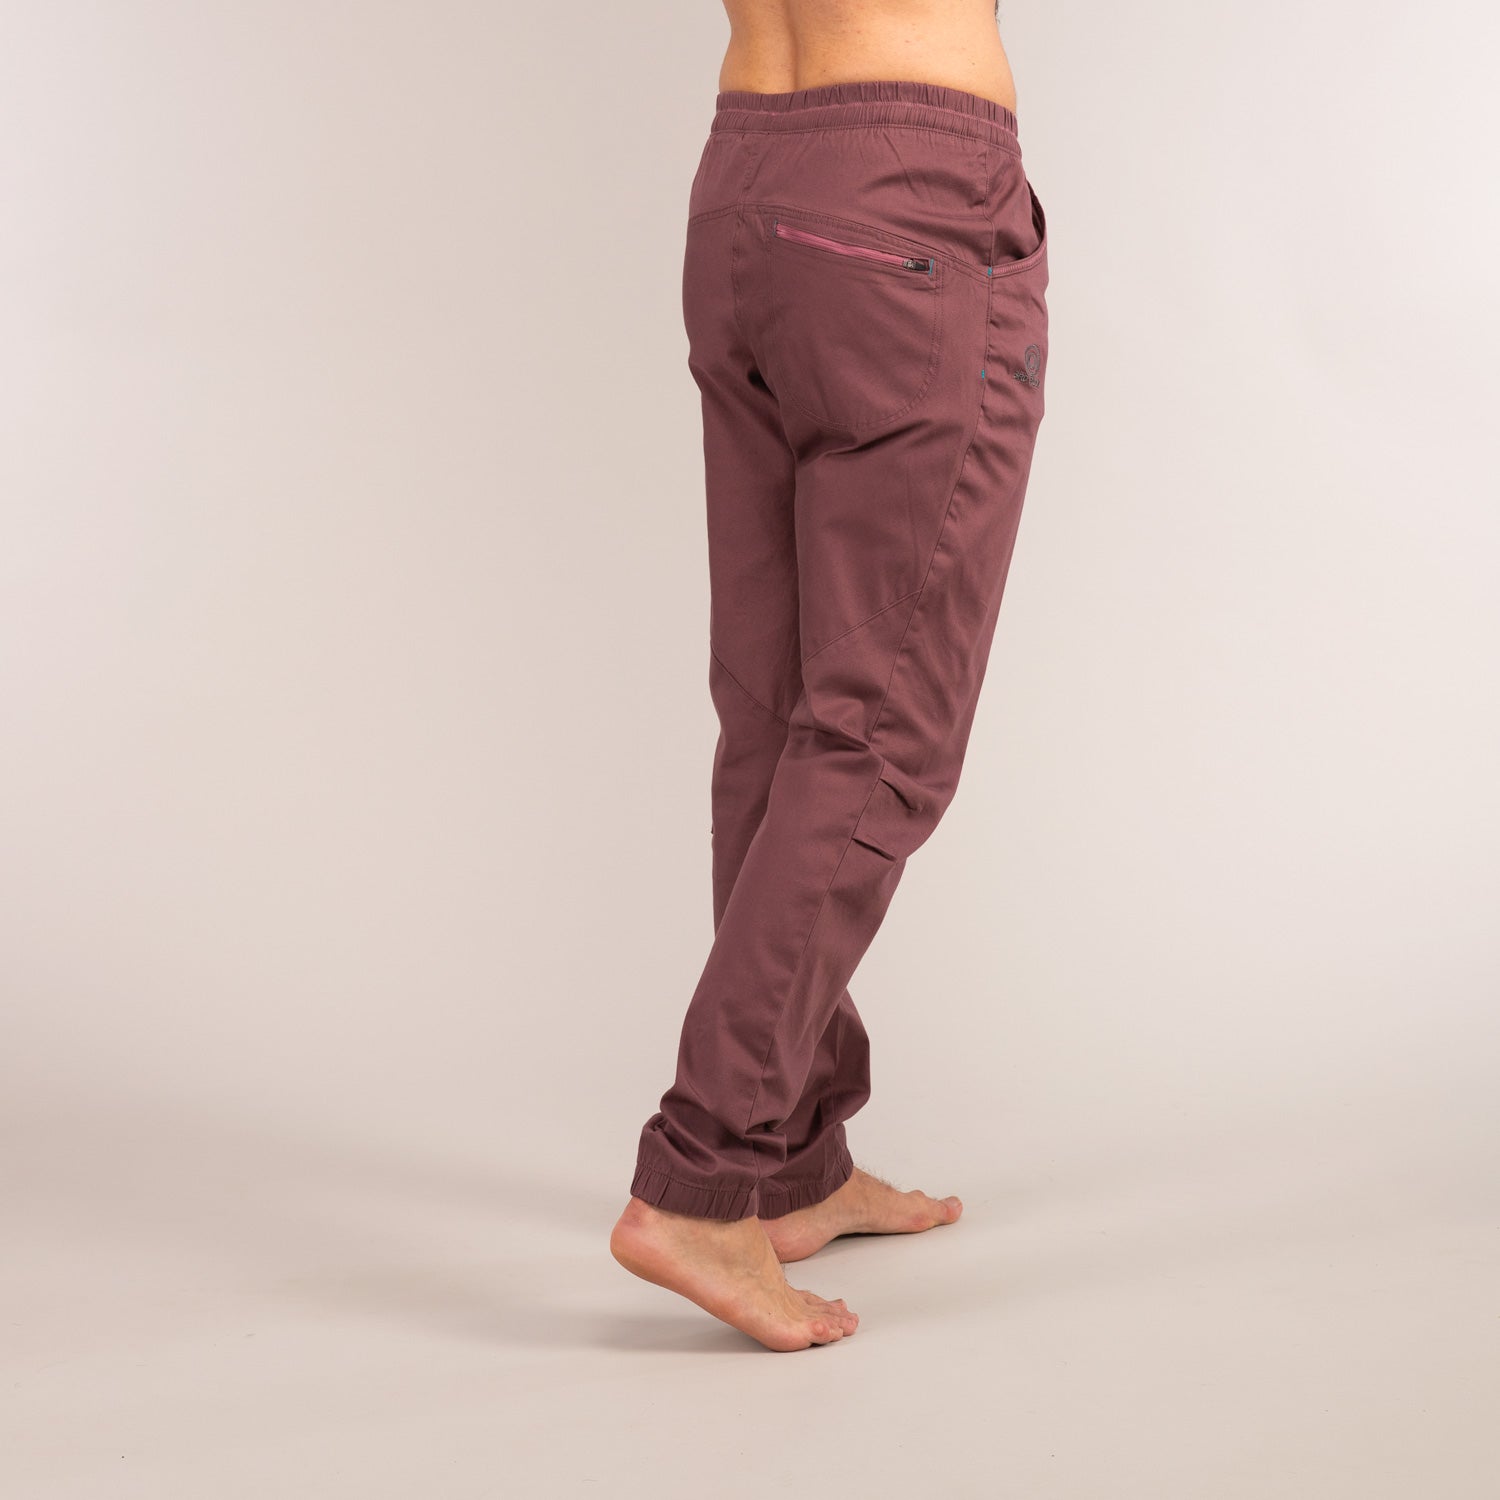 MARGO Adventure Trousers | Organic Cotton Outdoor Trousers | 3RD ROCK Clothing - Oliver is 6ft 2" with a 34" waist, 40" hips and wears a 34/LL M M